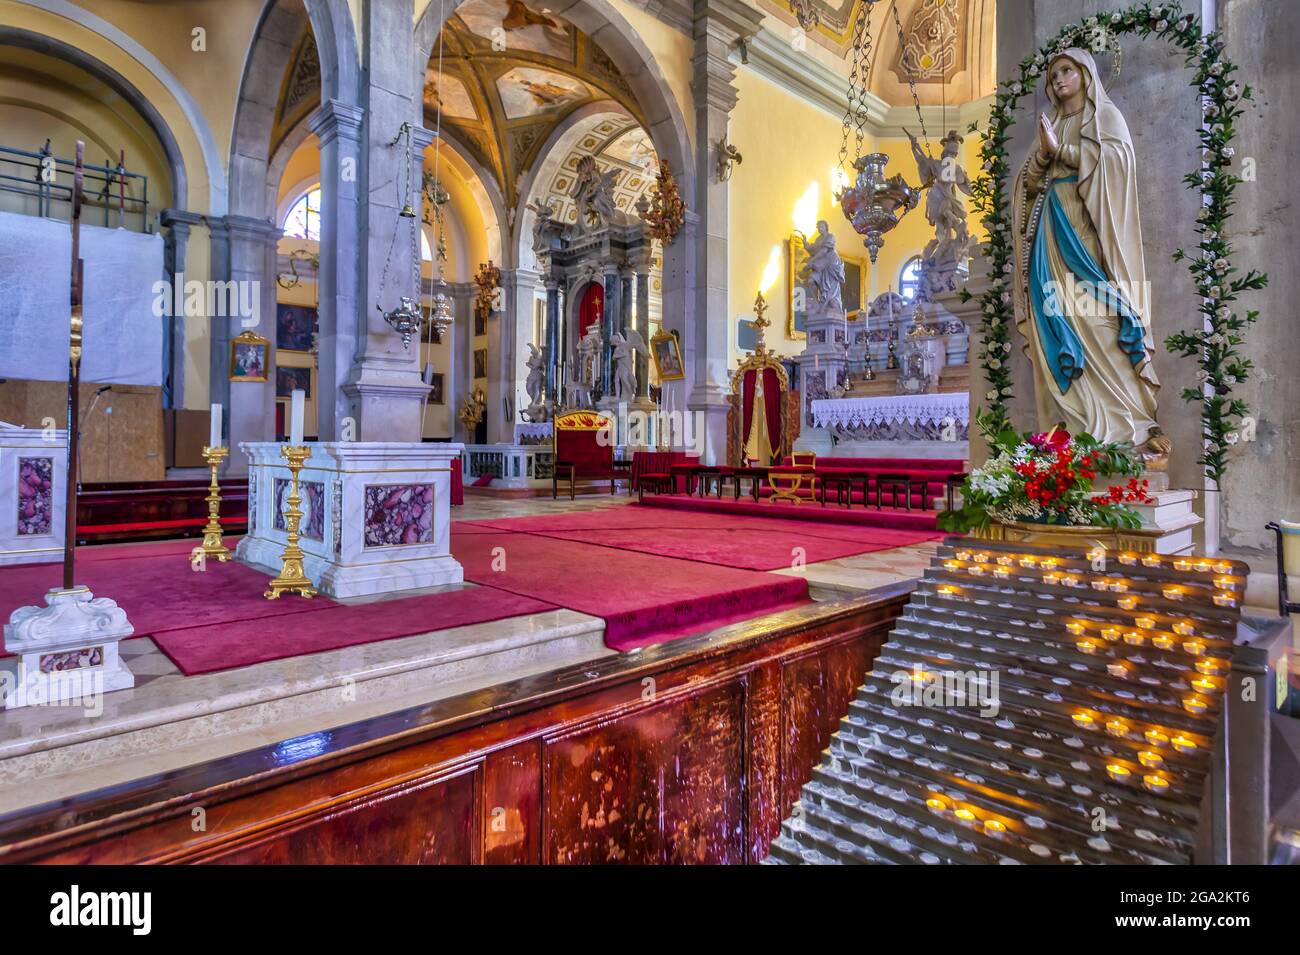 Interior of the Church of St Euphemia, showing a religious statue and candles lit for prayers and intentions with an elaborate main altar in the ba... Stock Photo